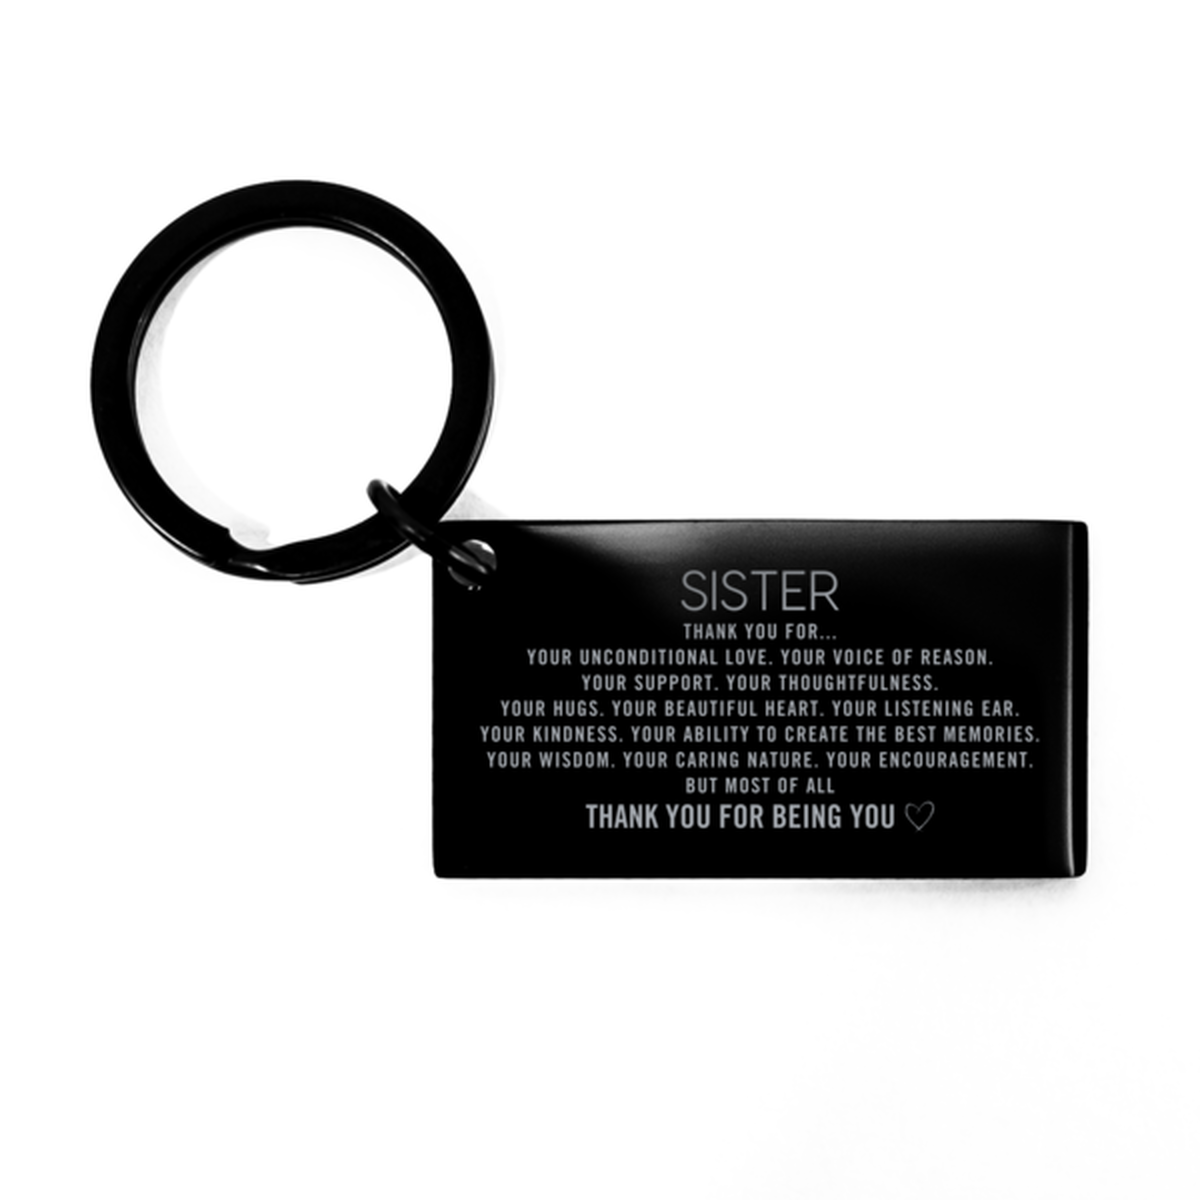 Sister Keychain Custom, Engraved Gifts For Sister Christmas Graduation Birthday Gifts for Men Women Sister Thank you for Your unconditional love